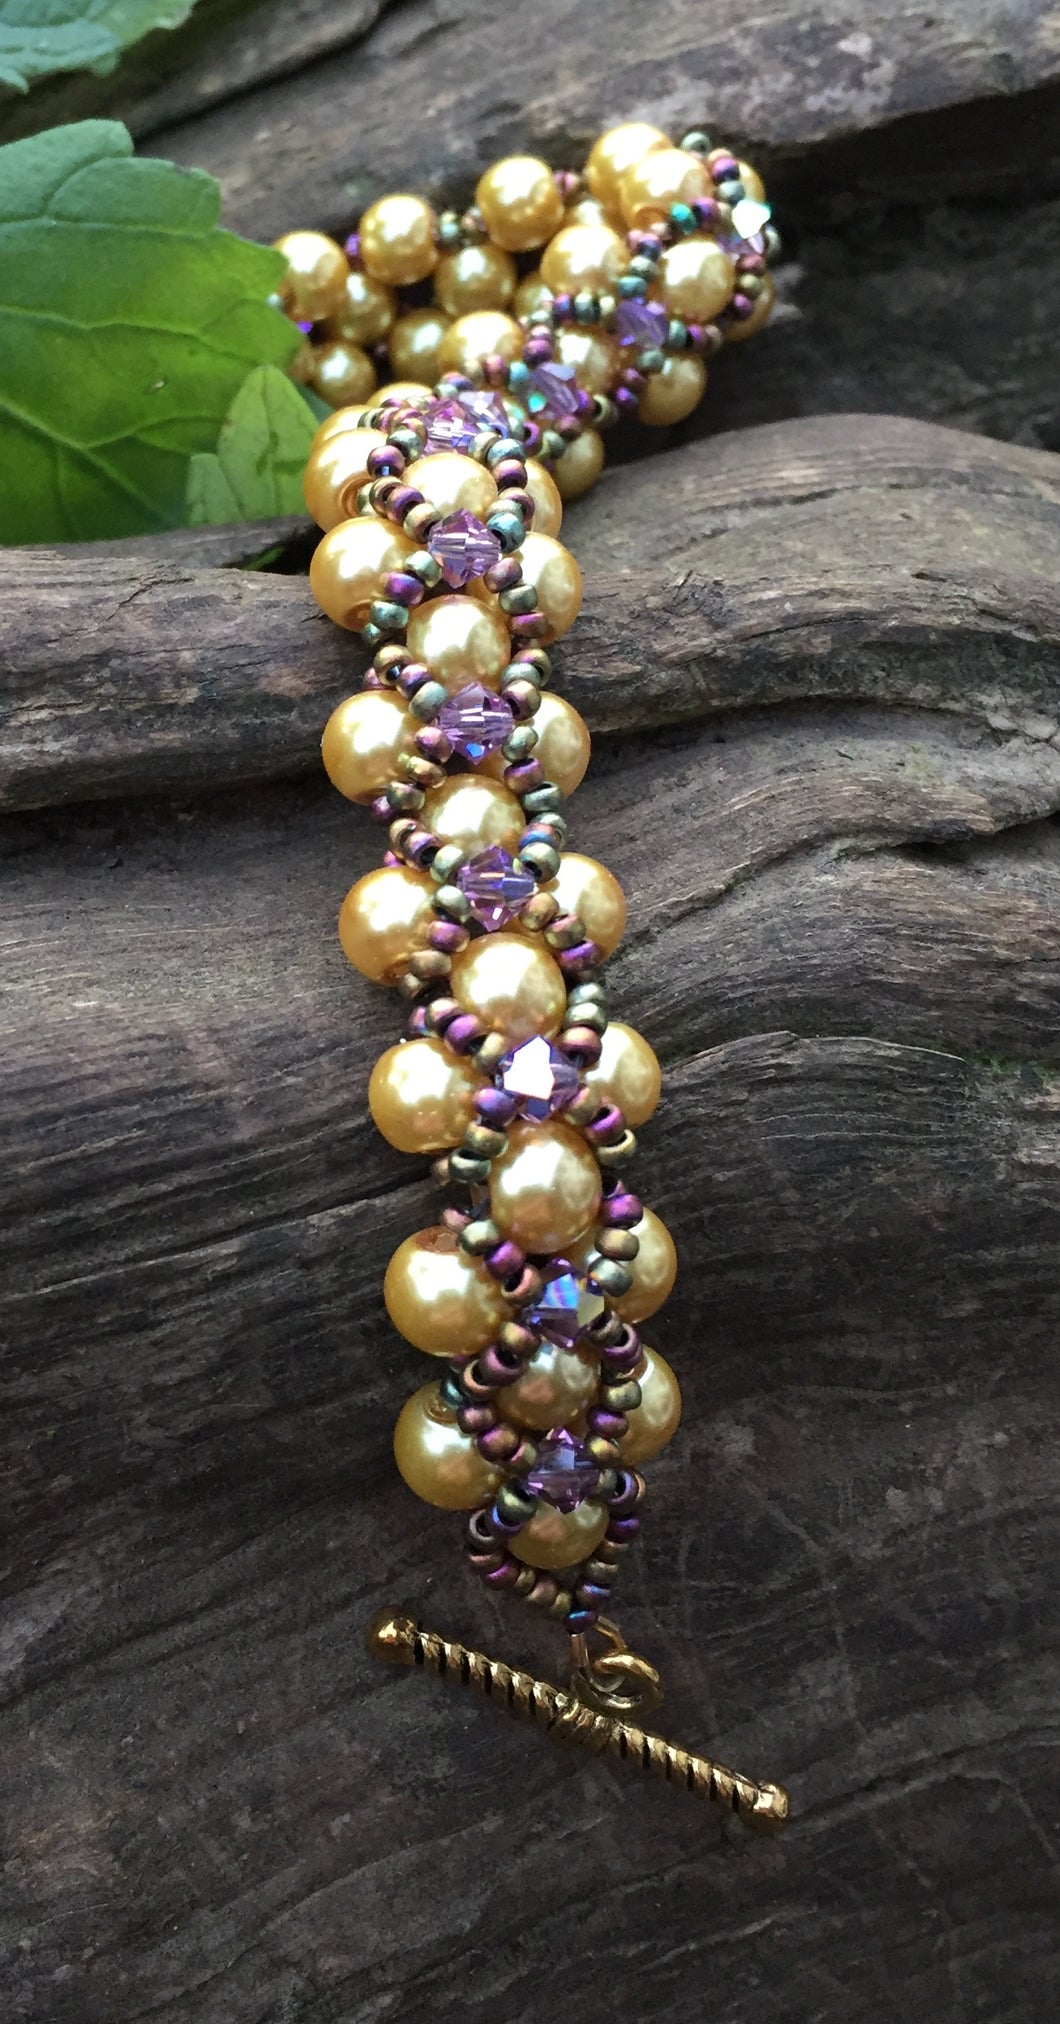 This Golden glass pearl and Amethyst bicone Swarovski crystal bracelet is netted together with Matte Iris seed beads and measures 7 7/8